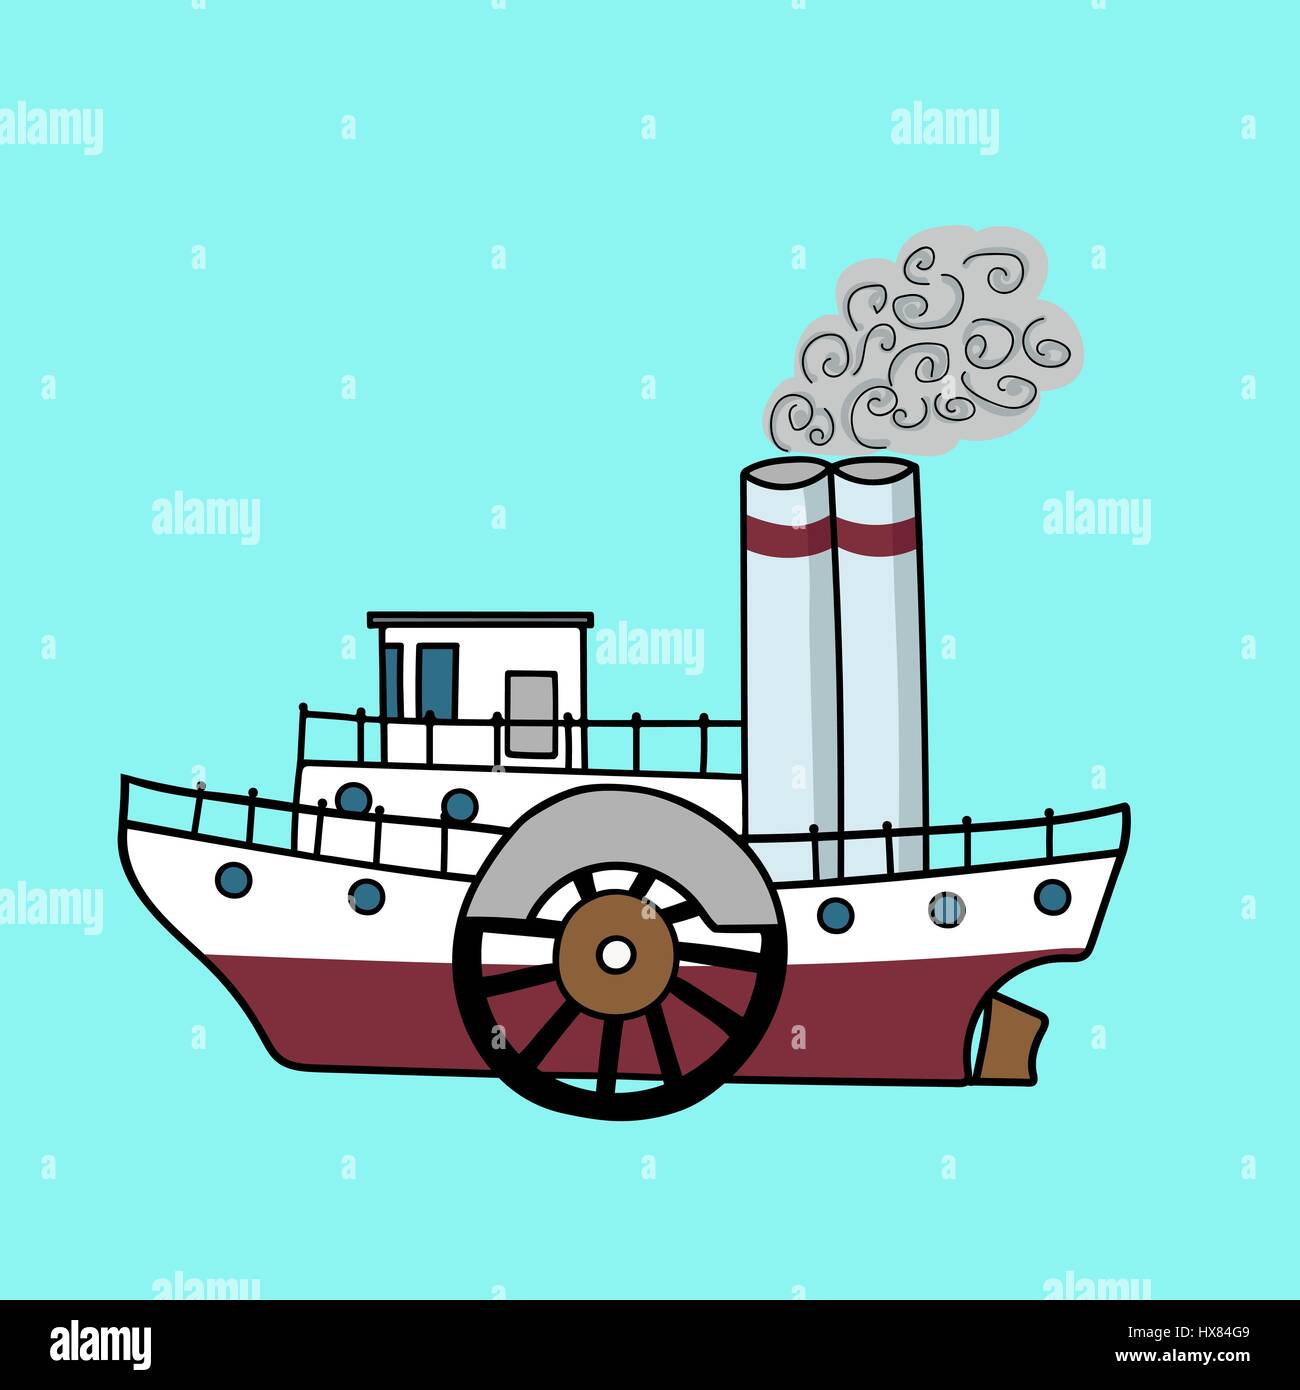 Cartoon flat steamship in the retro style. Old steamboat on a blue background. Hand drawn vector illustration. Stock Vector